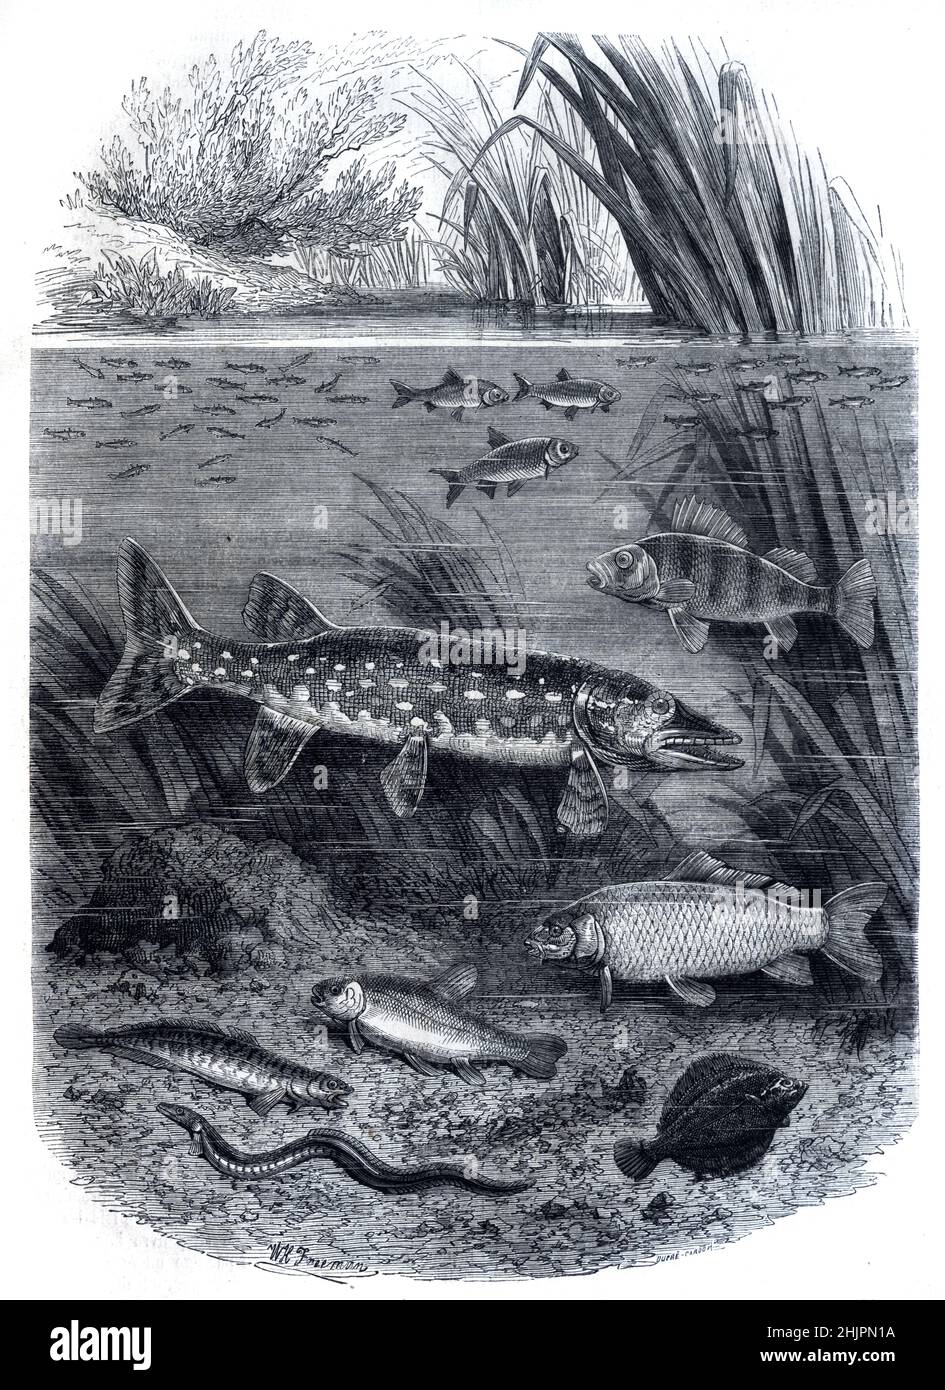 Illustration Showing Different Feeding Levels, Trophic Levels or Zones of Freshwater Fish including Bottom Feeders & Surface Feeders and  River Ecosystem Vintage Illustration or Engraving 1865 Stock Photo